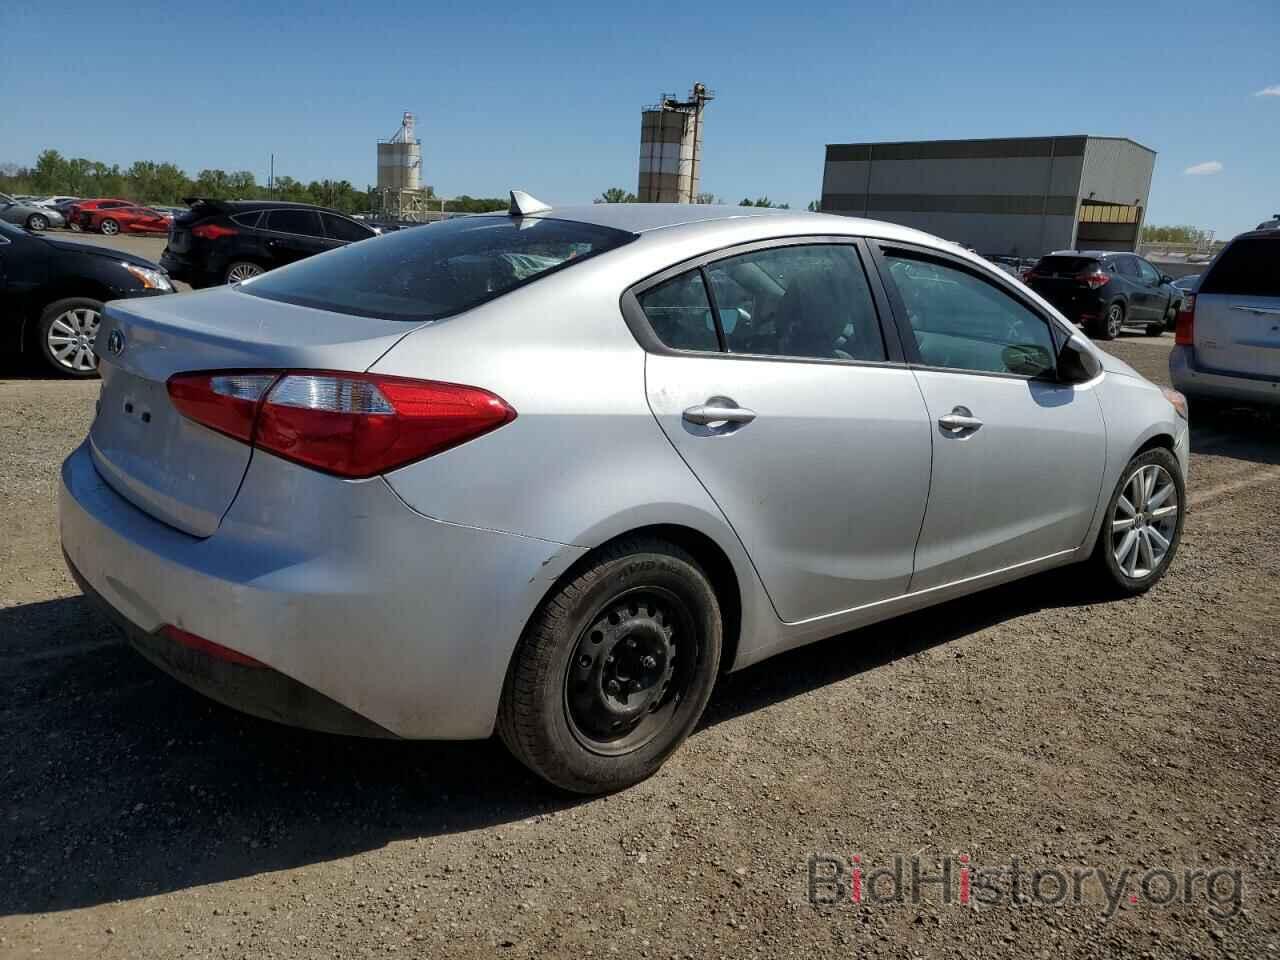 Report KNAFK4A65G5533776 KIA FORTE 2016 SILVER GAS - price and damage ...